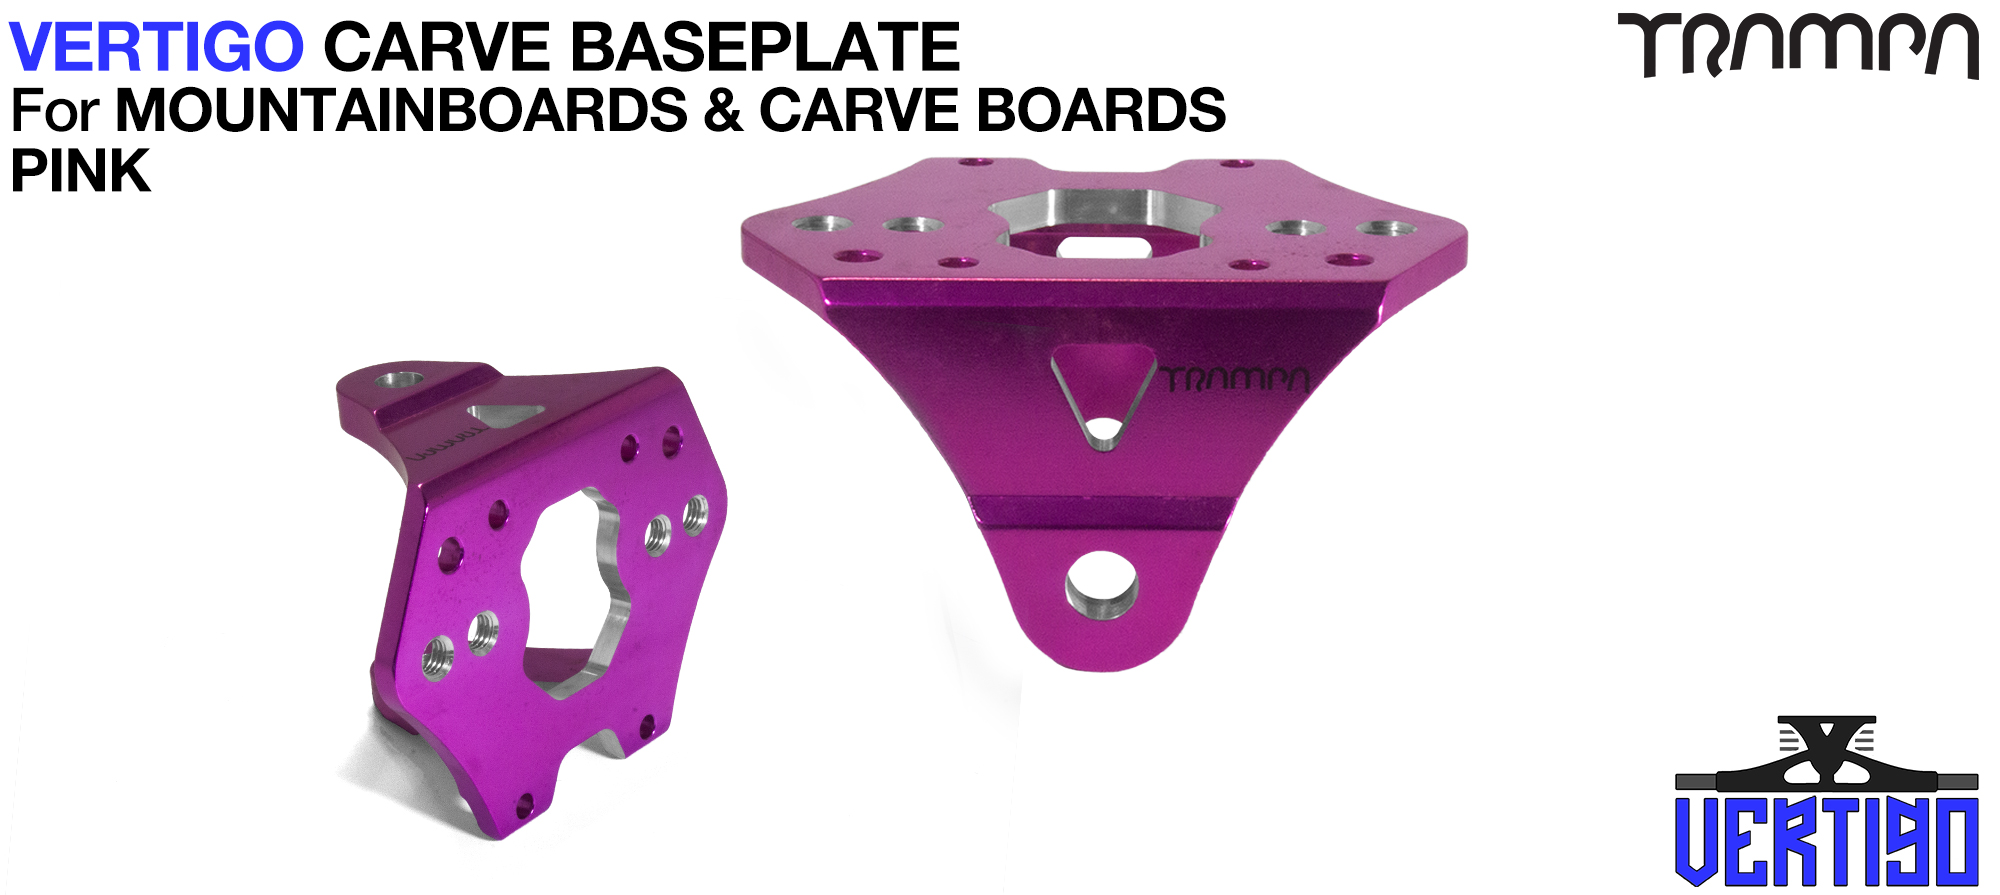 PINK Anodised with BLACK Logo VERTIGO Baseplate - Super Strong & CNC'd light made from Extruded T6 Aluminum  